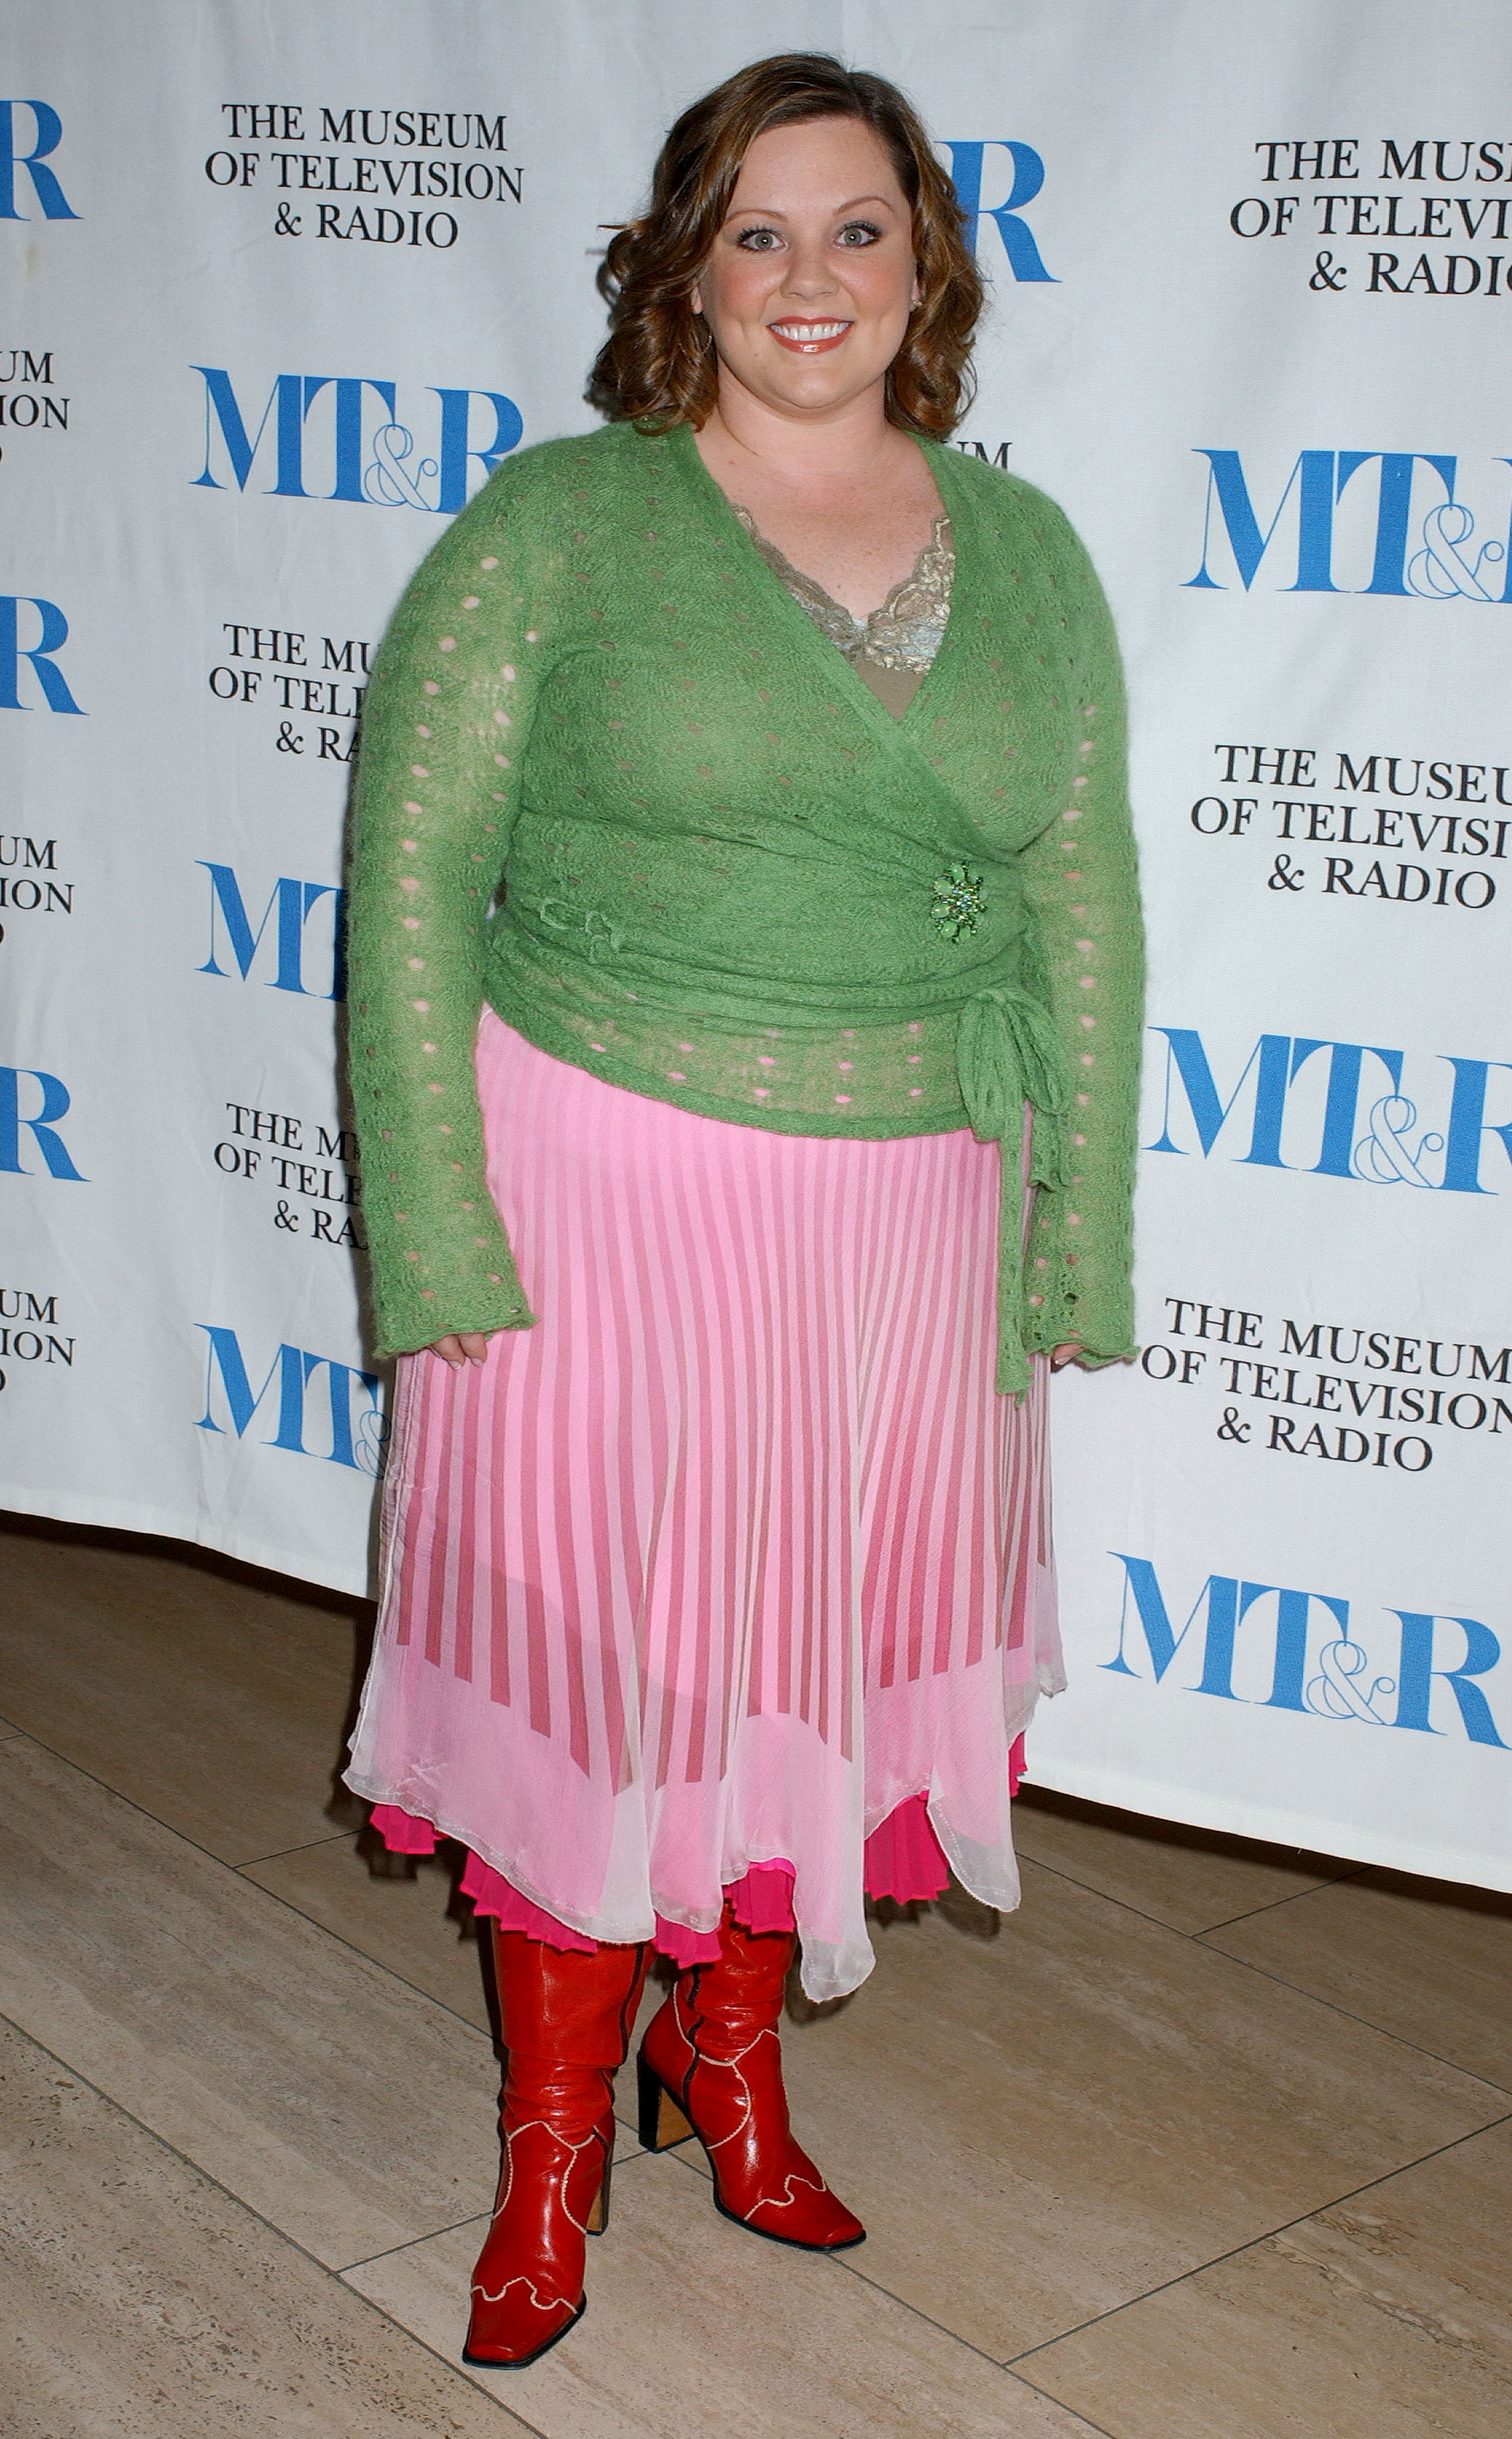 Melissa McCarthy during the "Gilmore Girls" 100th Episode Celebration in Beverly Hills, California, on February 7, 2005 | Source: Getty Images